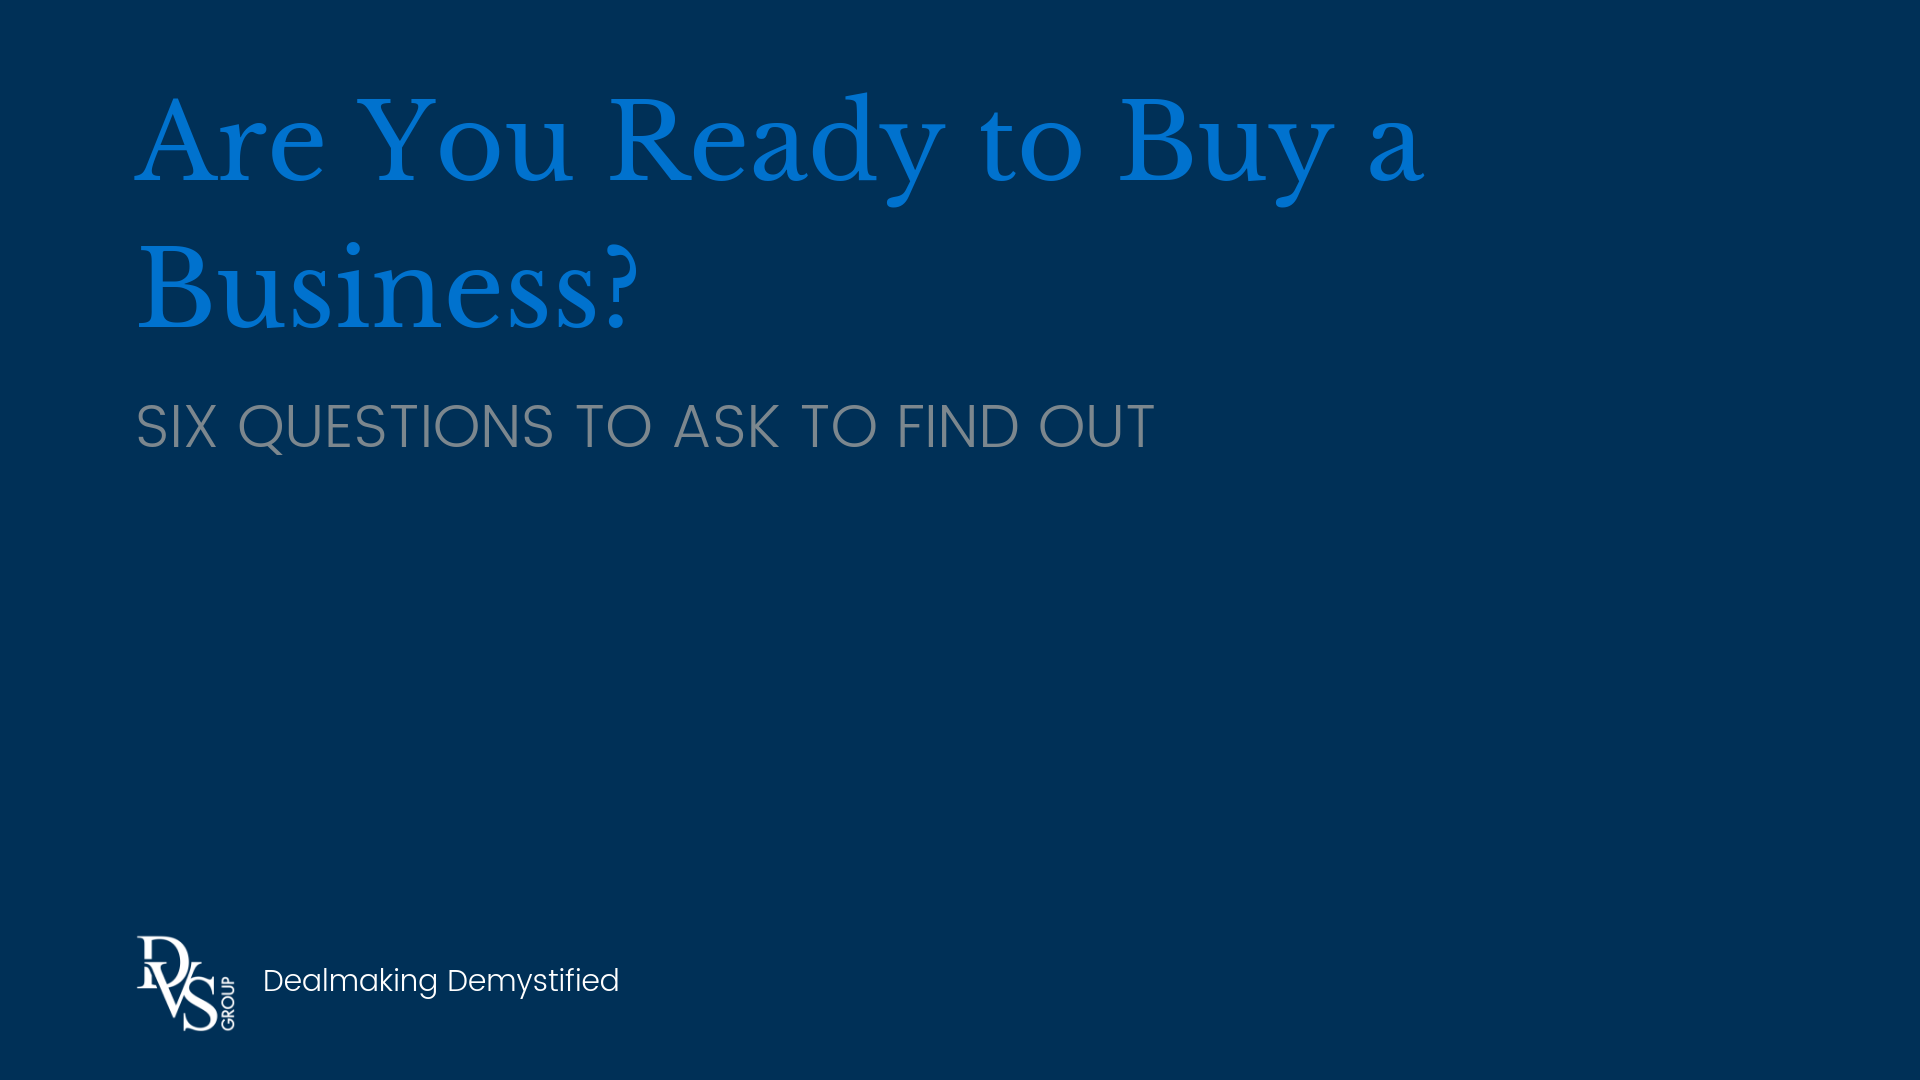 Are You Ready to Buy a Business?